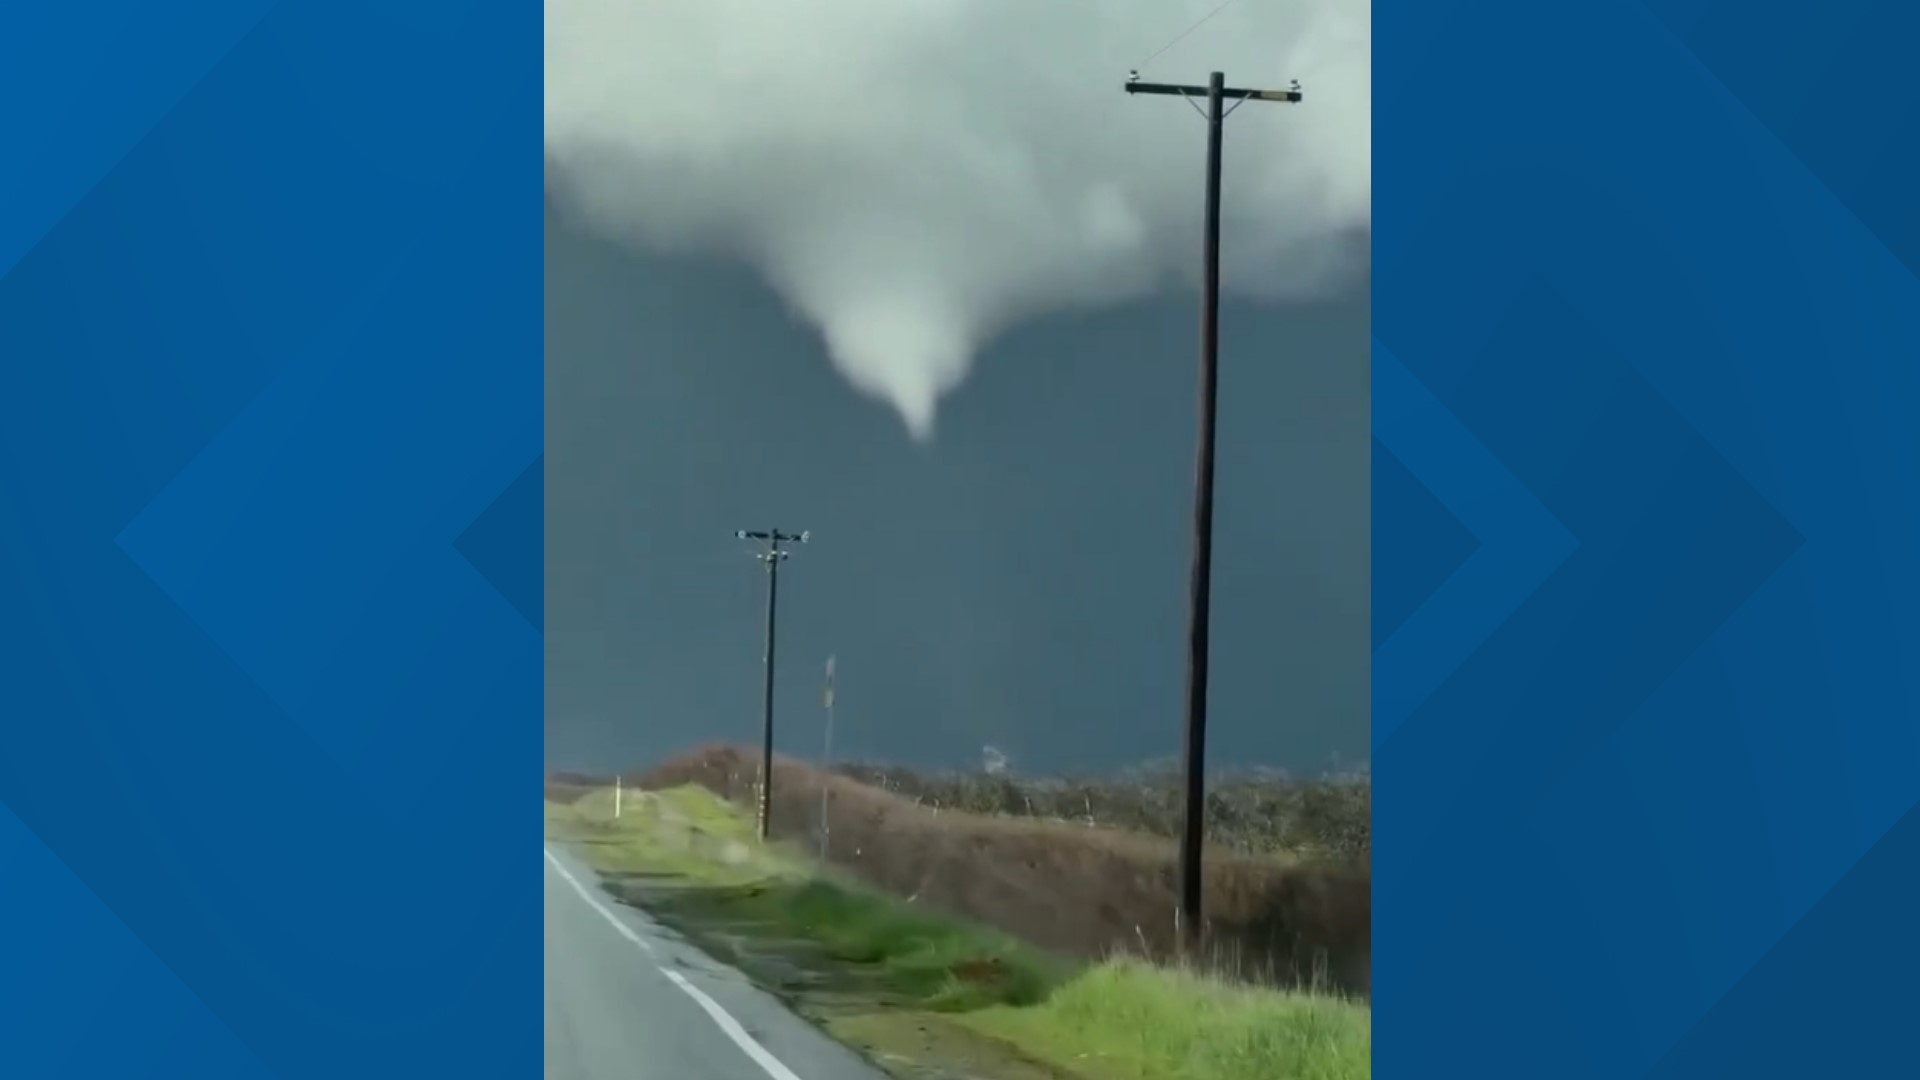 The National Weather Service Hanford confirms two tornadoes formed in Madera County